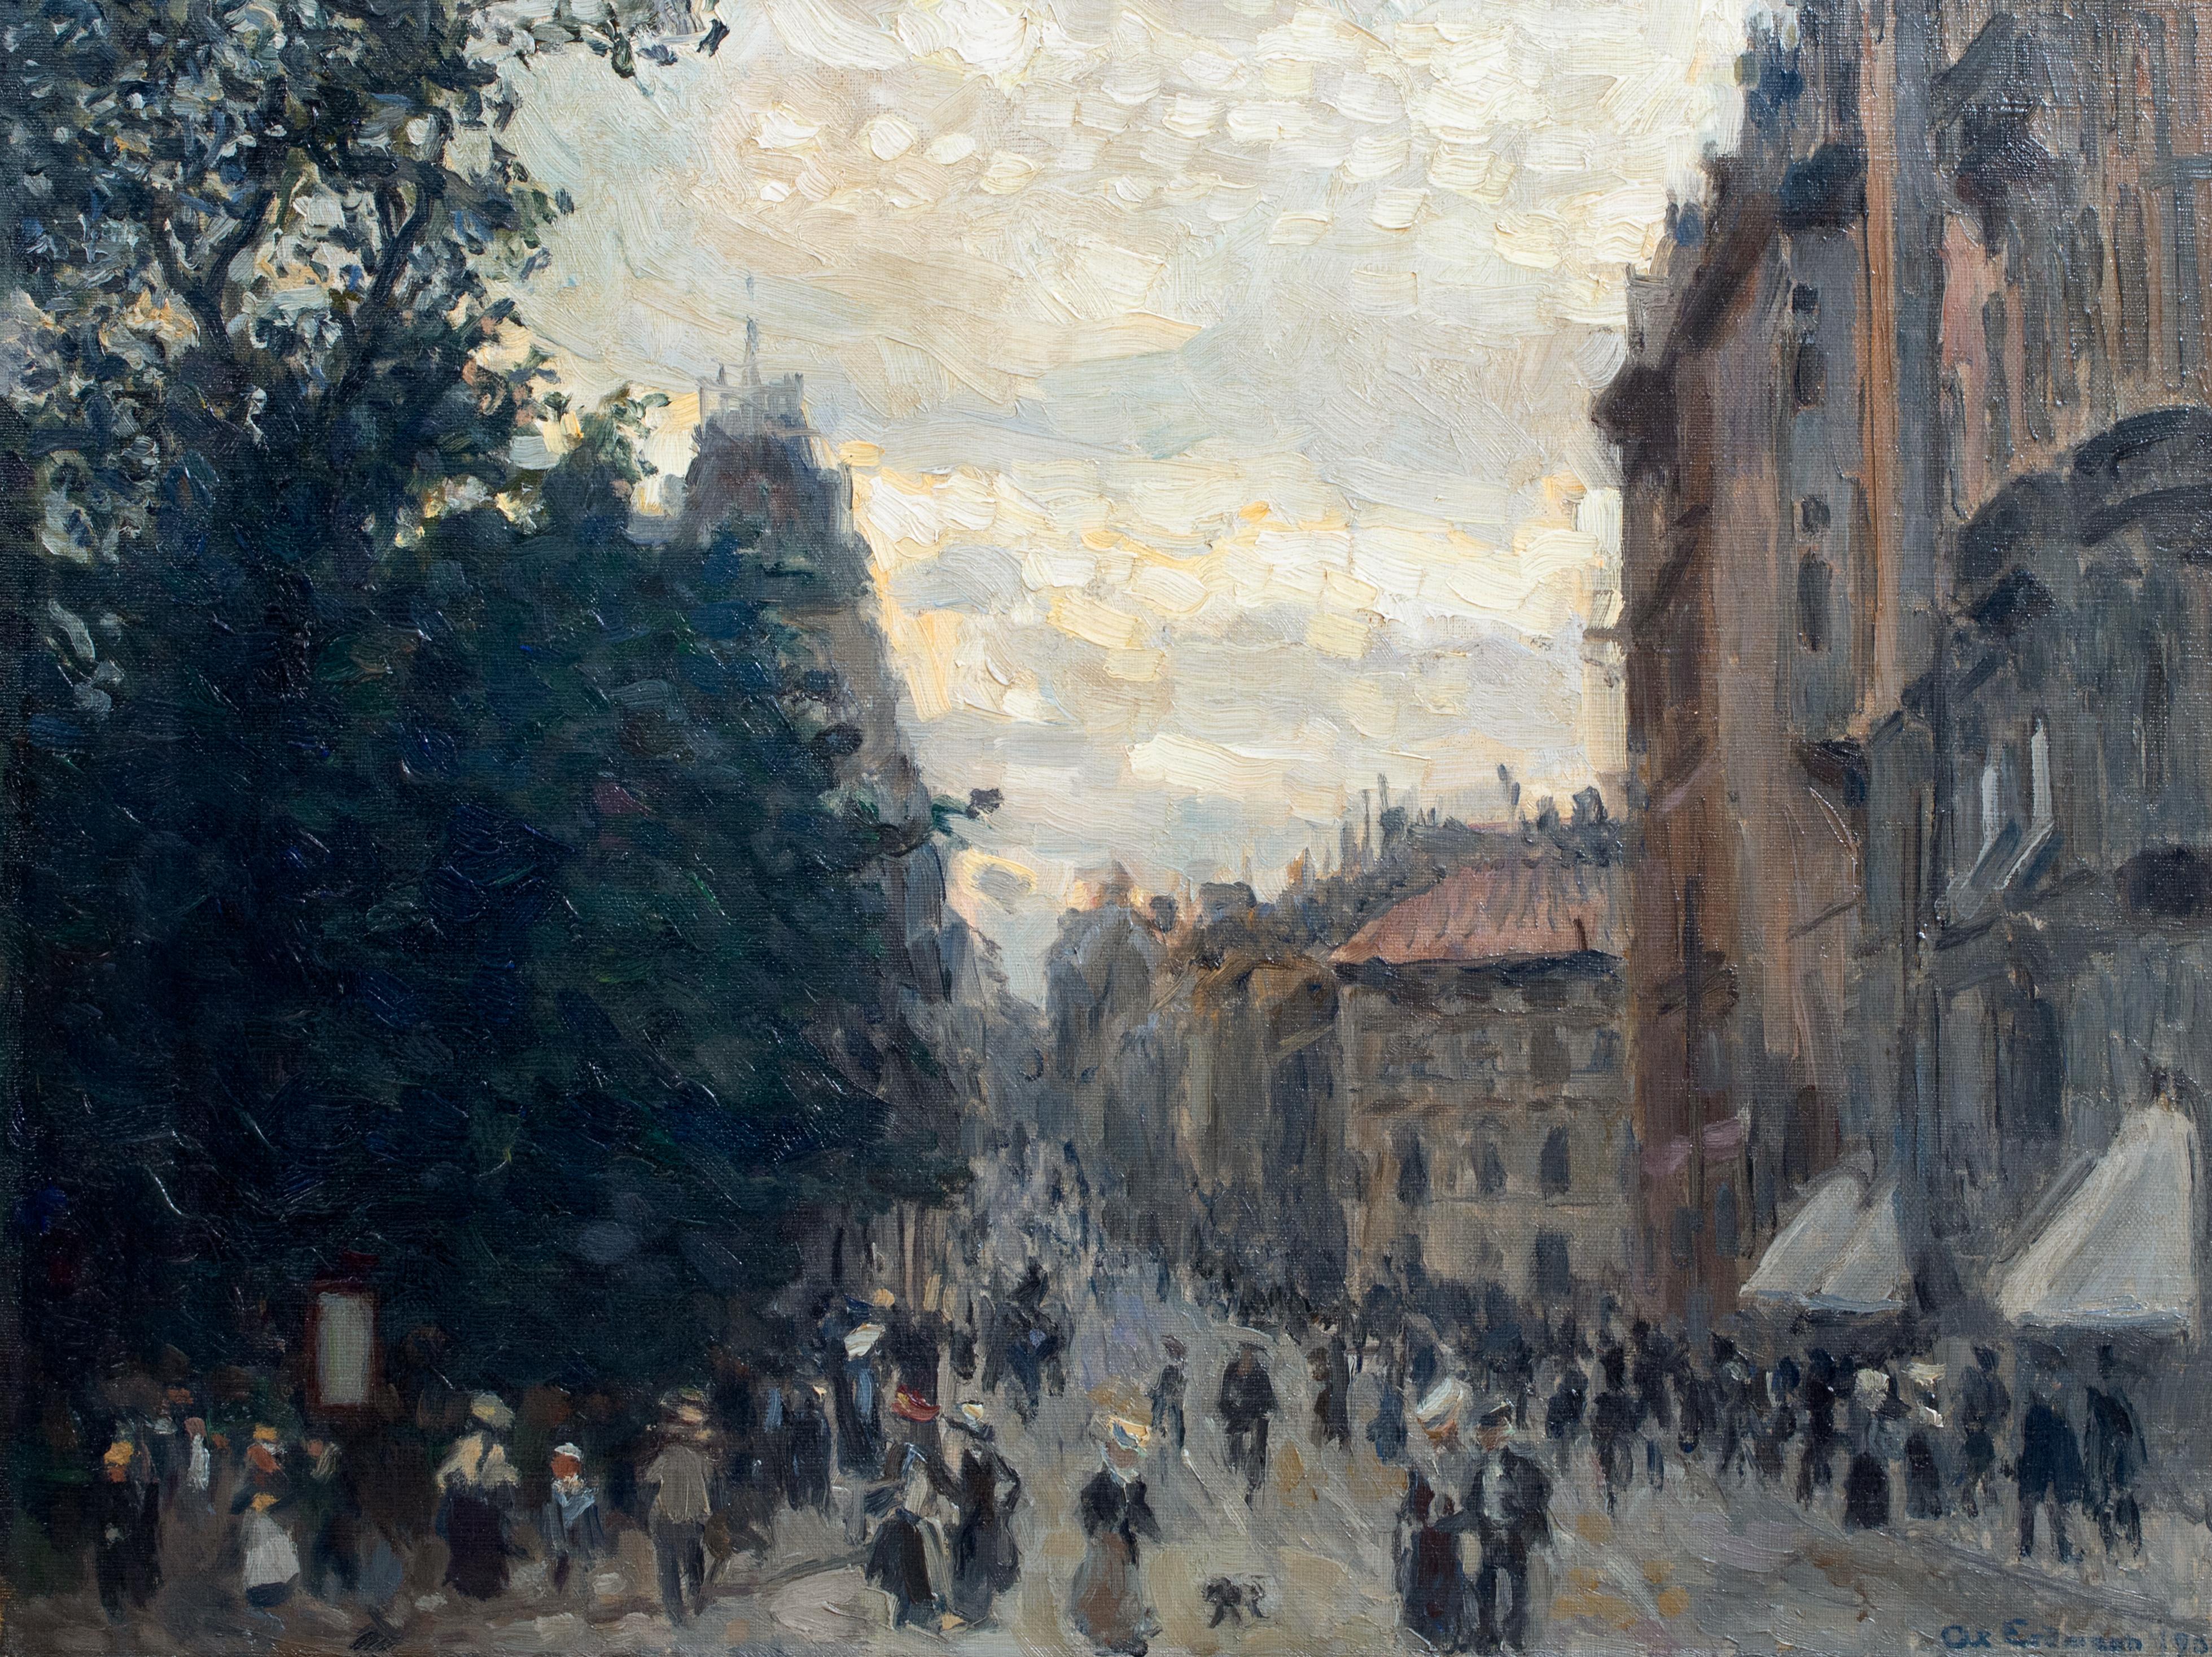 Stockholm, 19th Century

by Axel Erdmann (1873-1954) similar to $20,000

19th Century Swedish Impressionist view of a street scene, Stockholm, oil on canvas by Axel Erdmann. Excellent quality and condition busy promade scene by a park with well